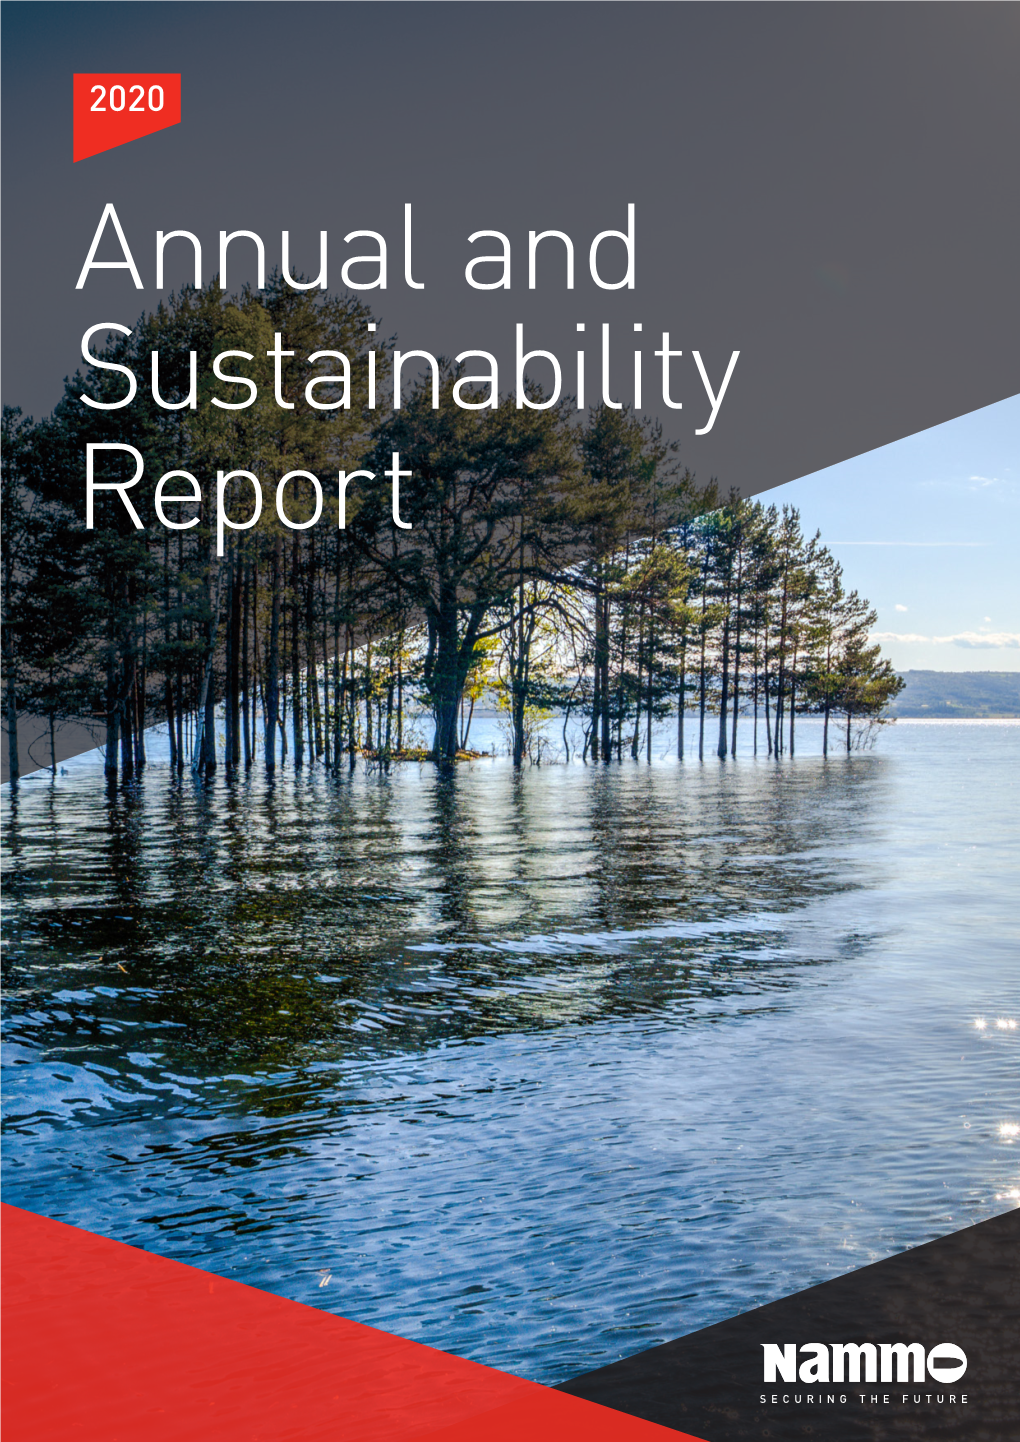 Nammo Annual and Sustainability Report 2020, Unless Stated Otherwise